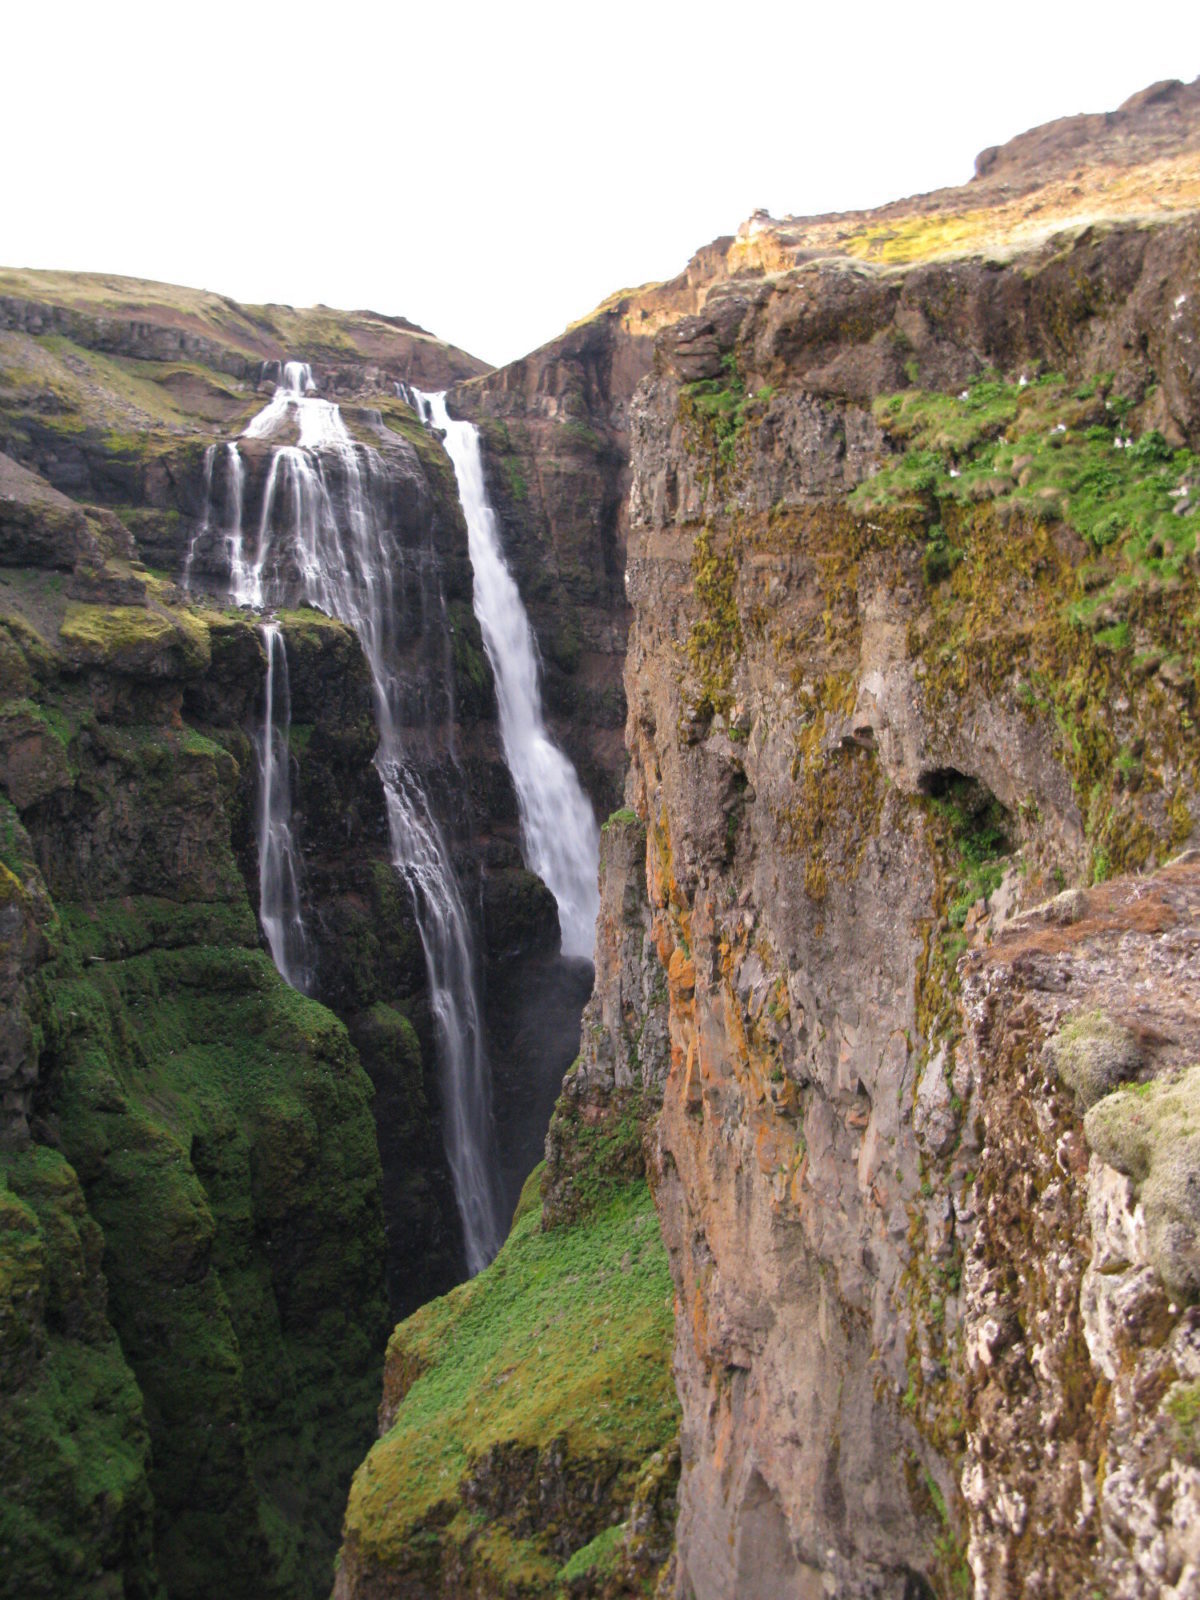 In A Massive Canyon Resides Glymur The Second Highest Waterfall In Iceland